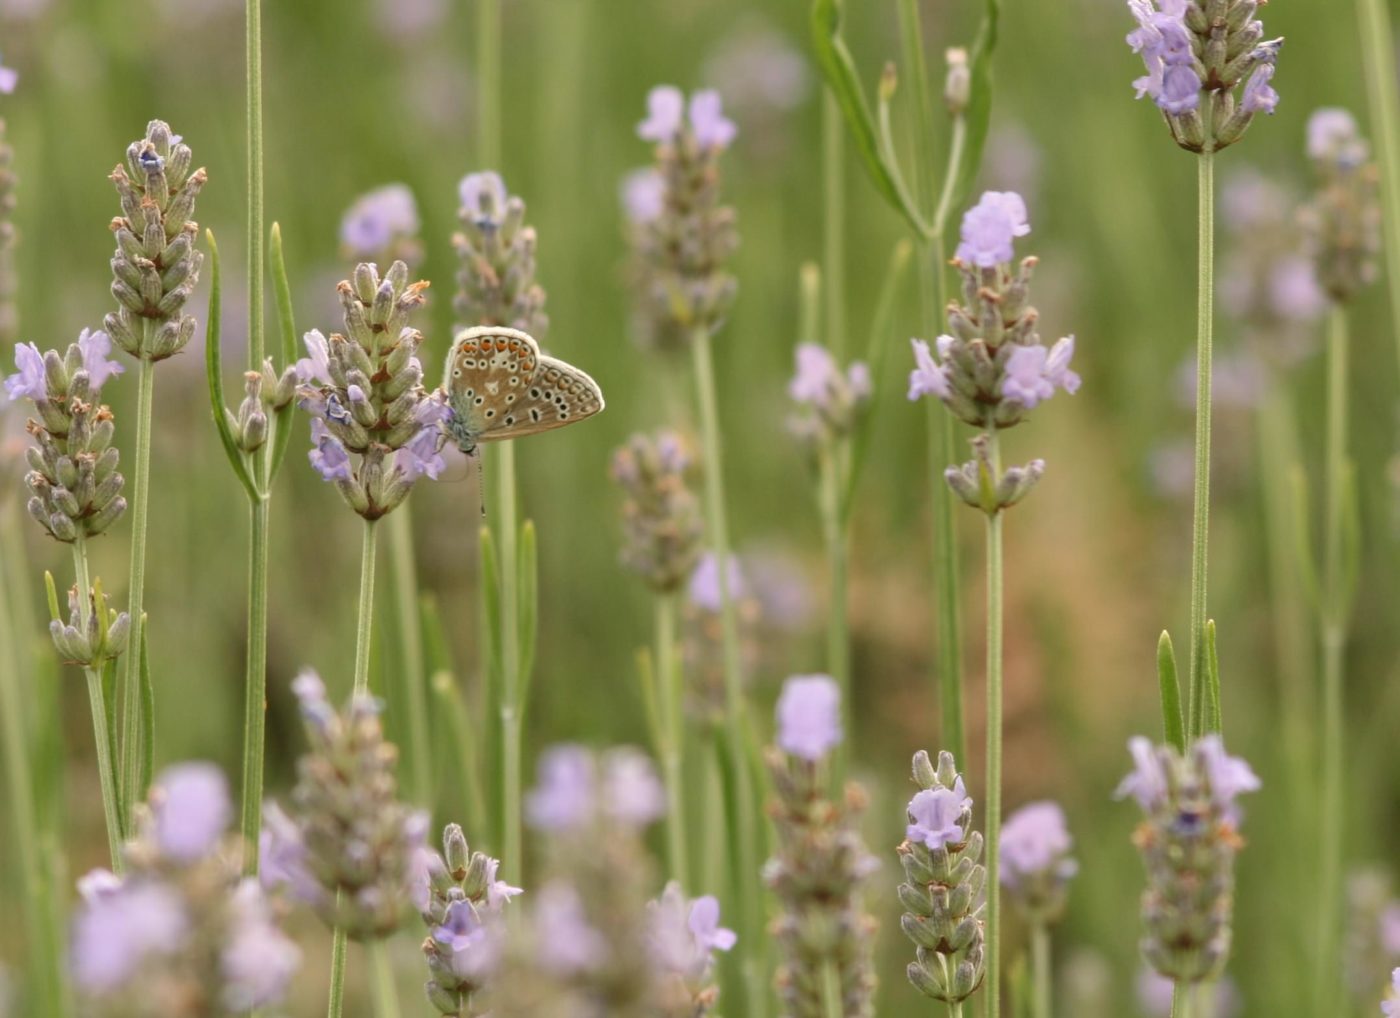 Common blue butterfly, Polyommatus icarus, on lavender